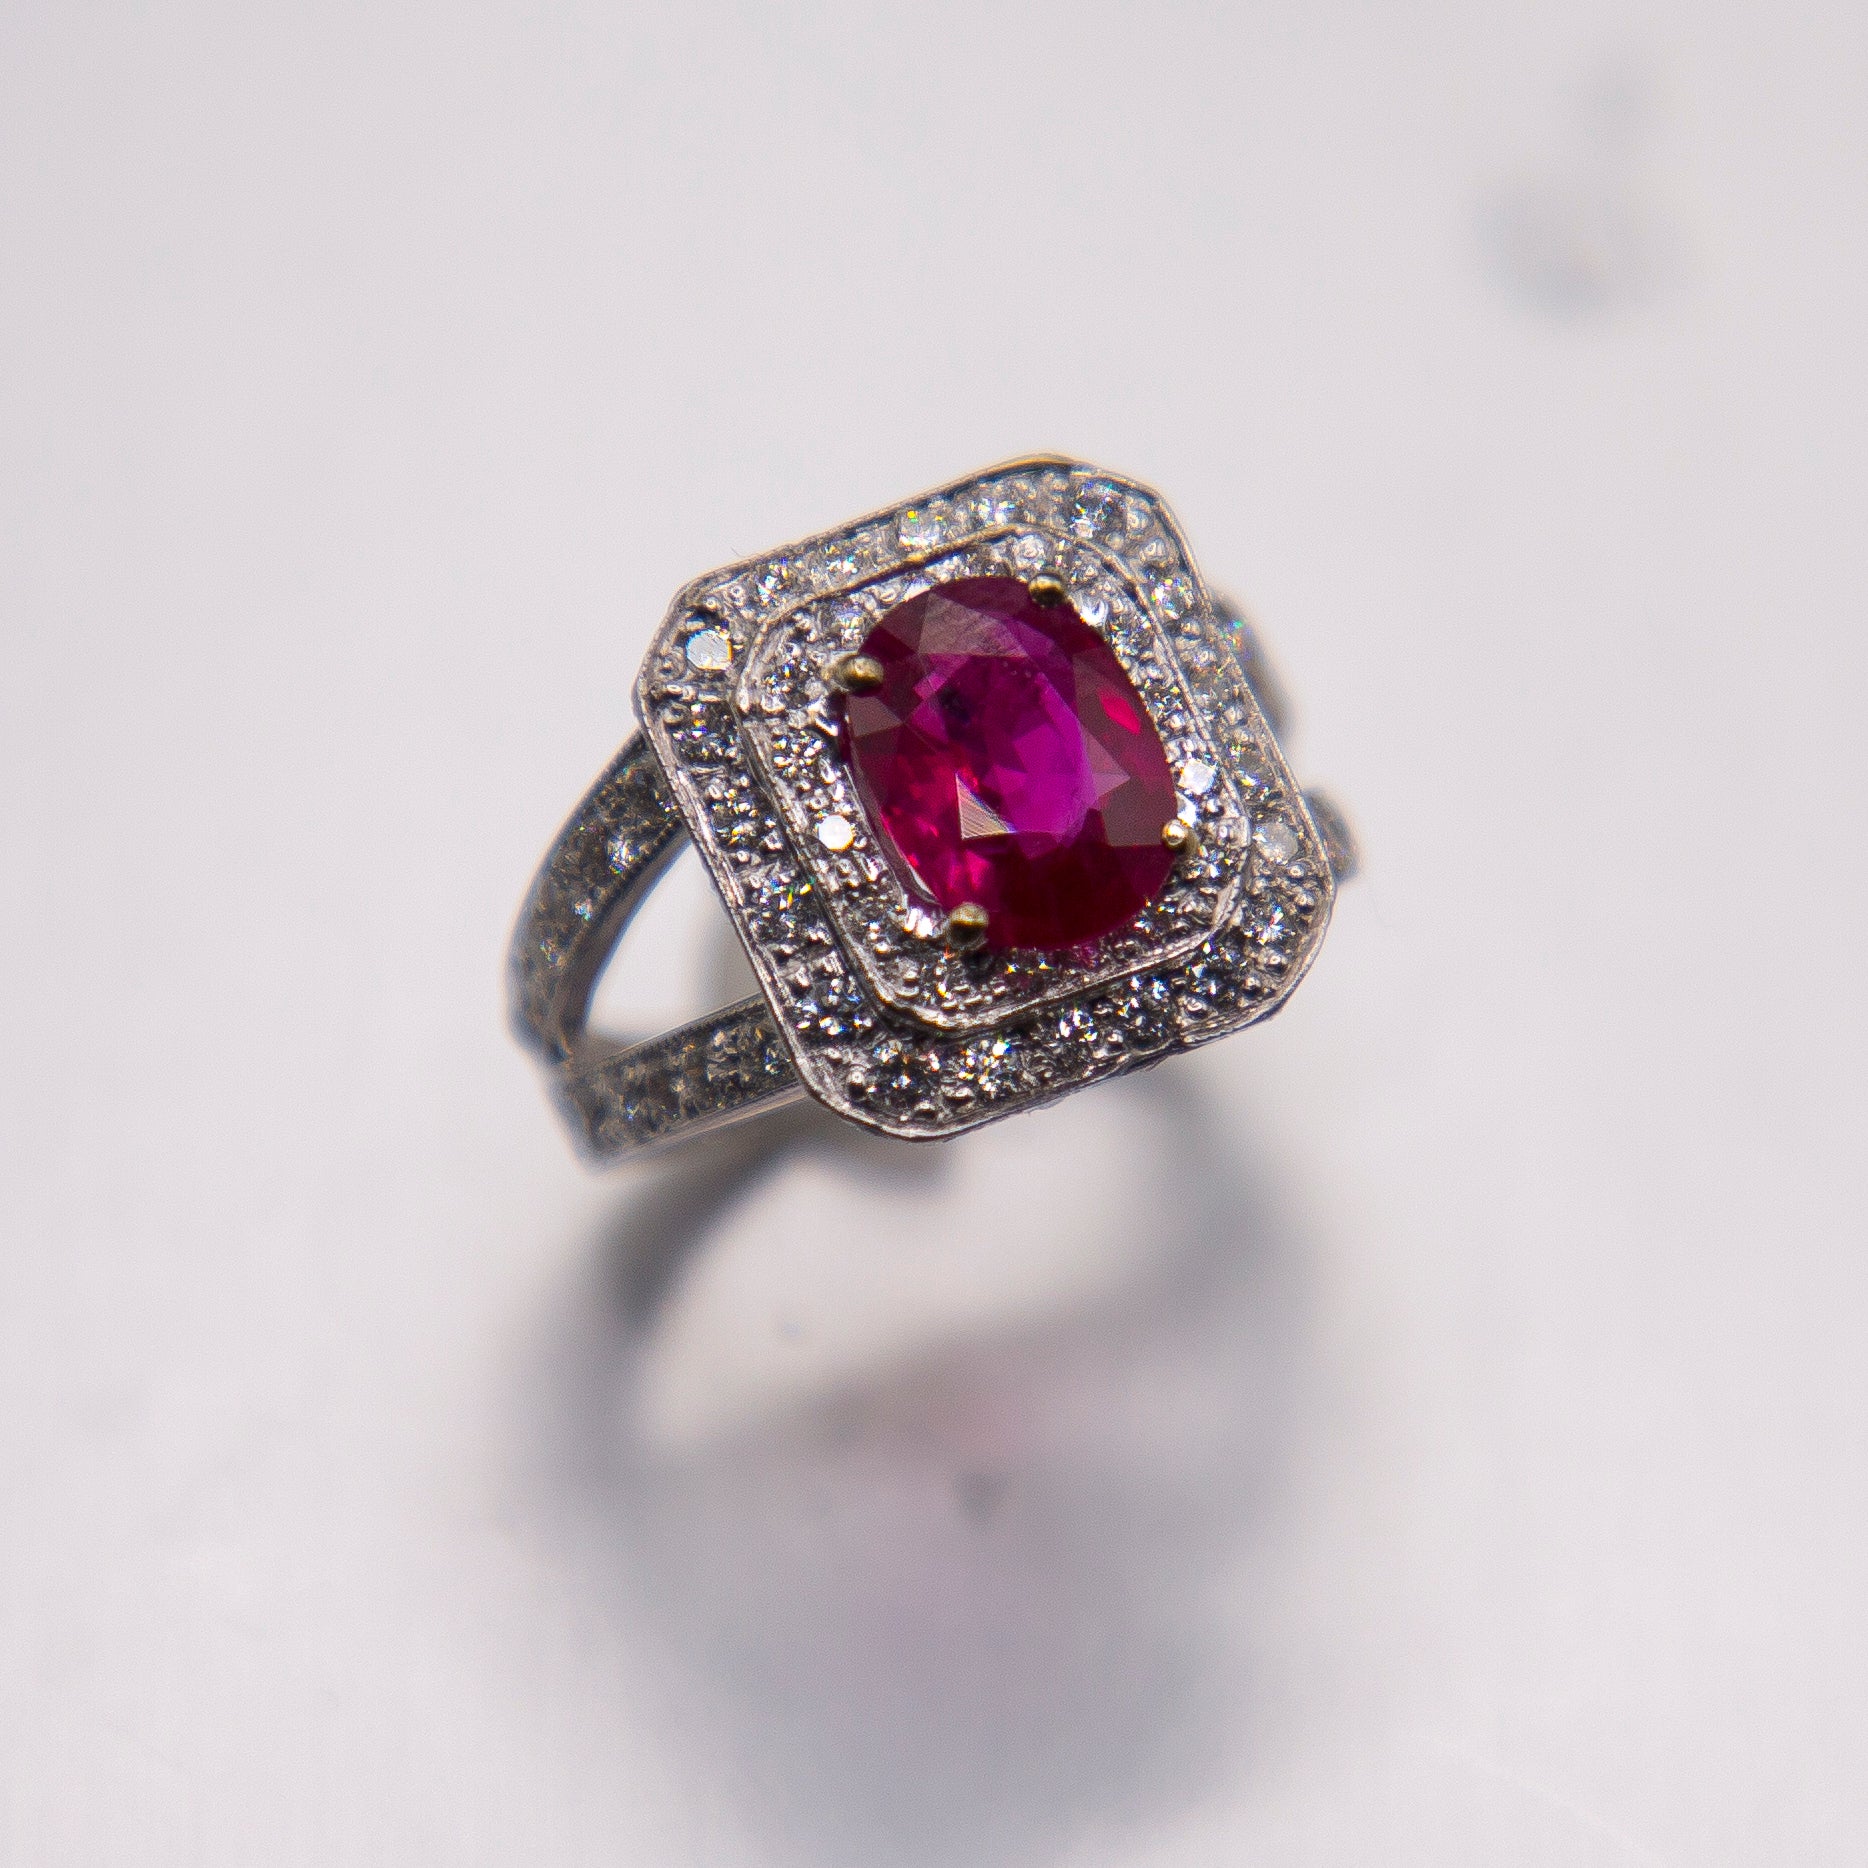 2.03ct. Oval Burma Ruby AGL Certified Fine Red/ 2.85cts. E Color Diamonds  For Sale